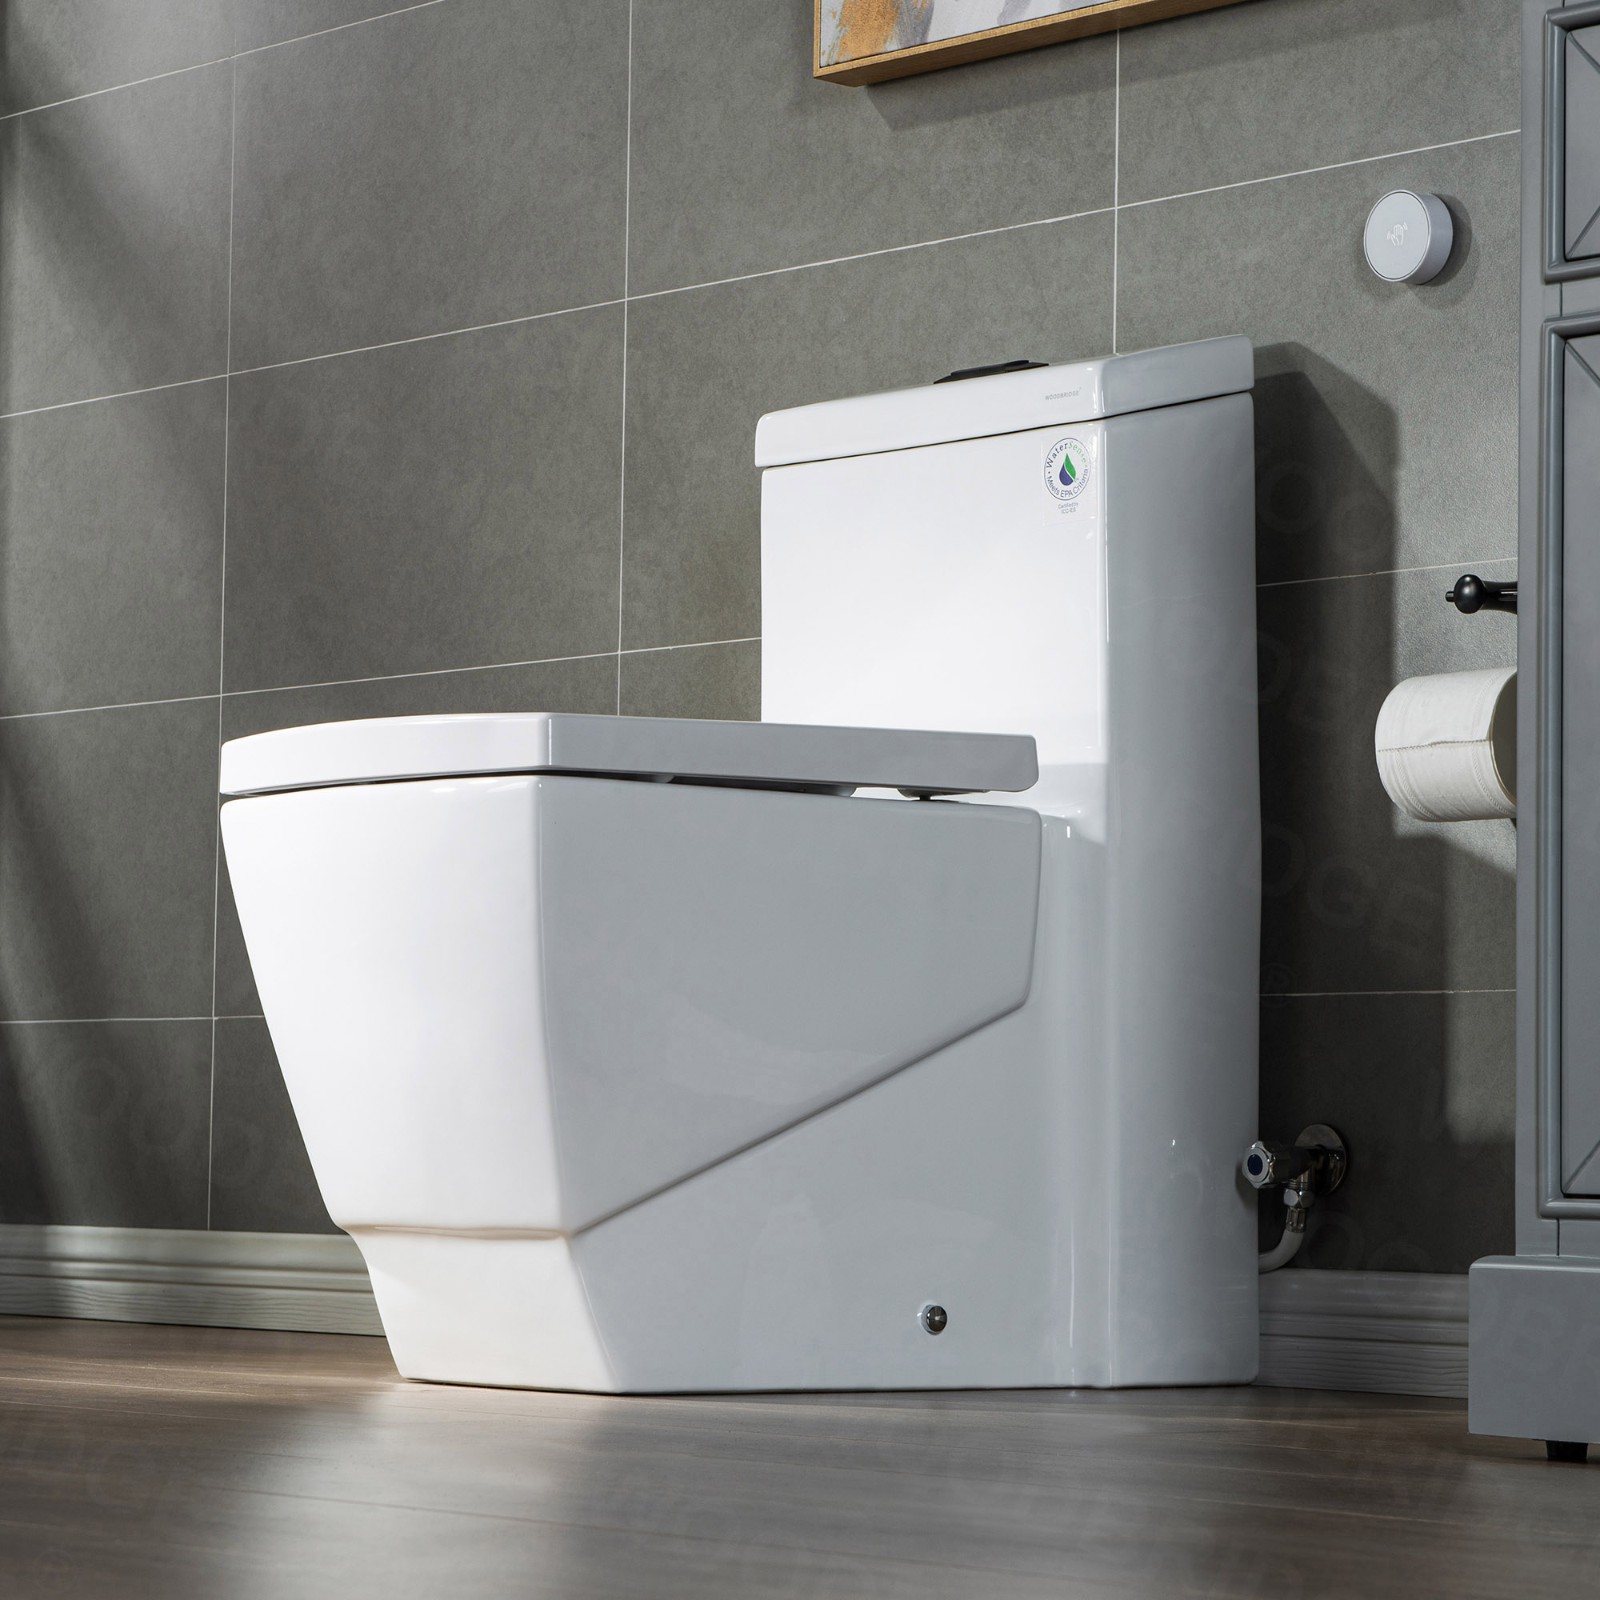  WOODBRIDGE B-0920-A Modern One-Piece Elongated Square toilet with Solf Closed Seat and Hand Free Touchless Sensor Flush Kit, White_5452